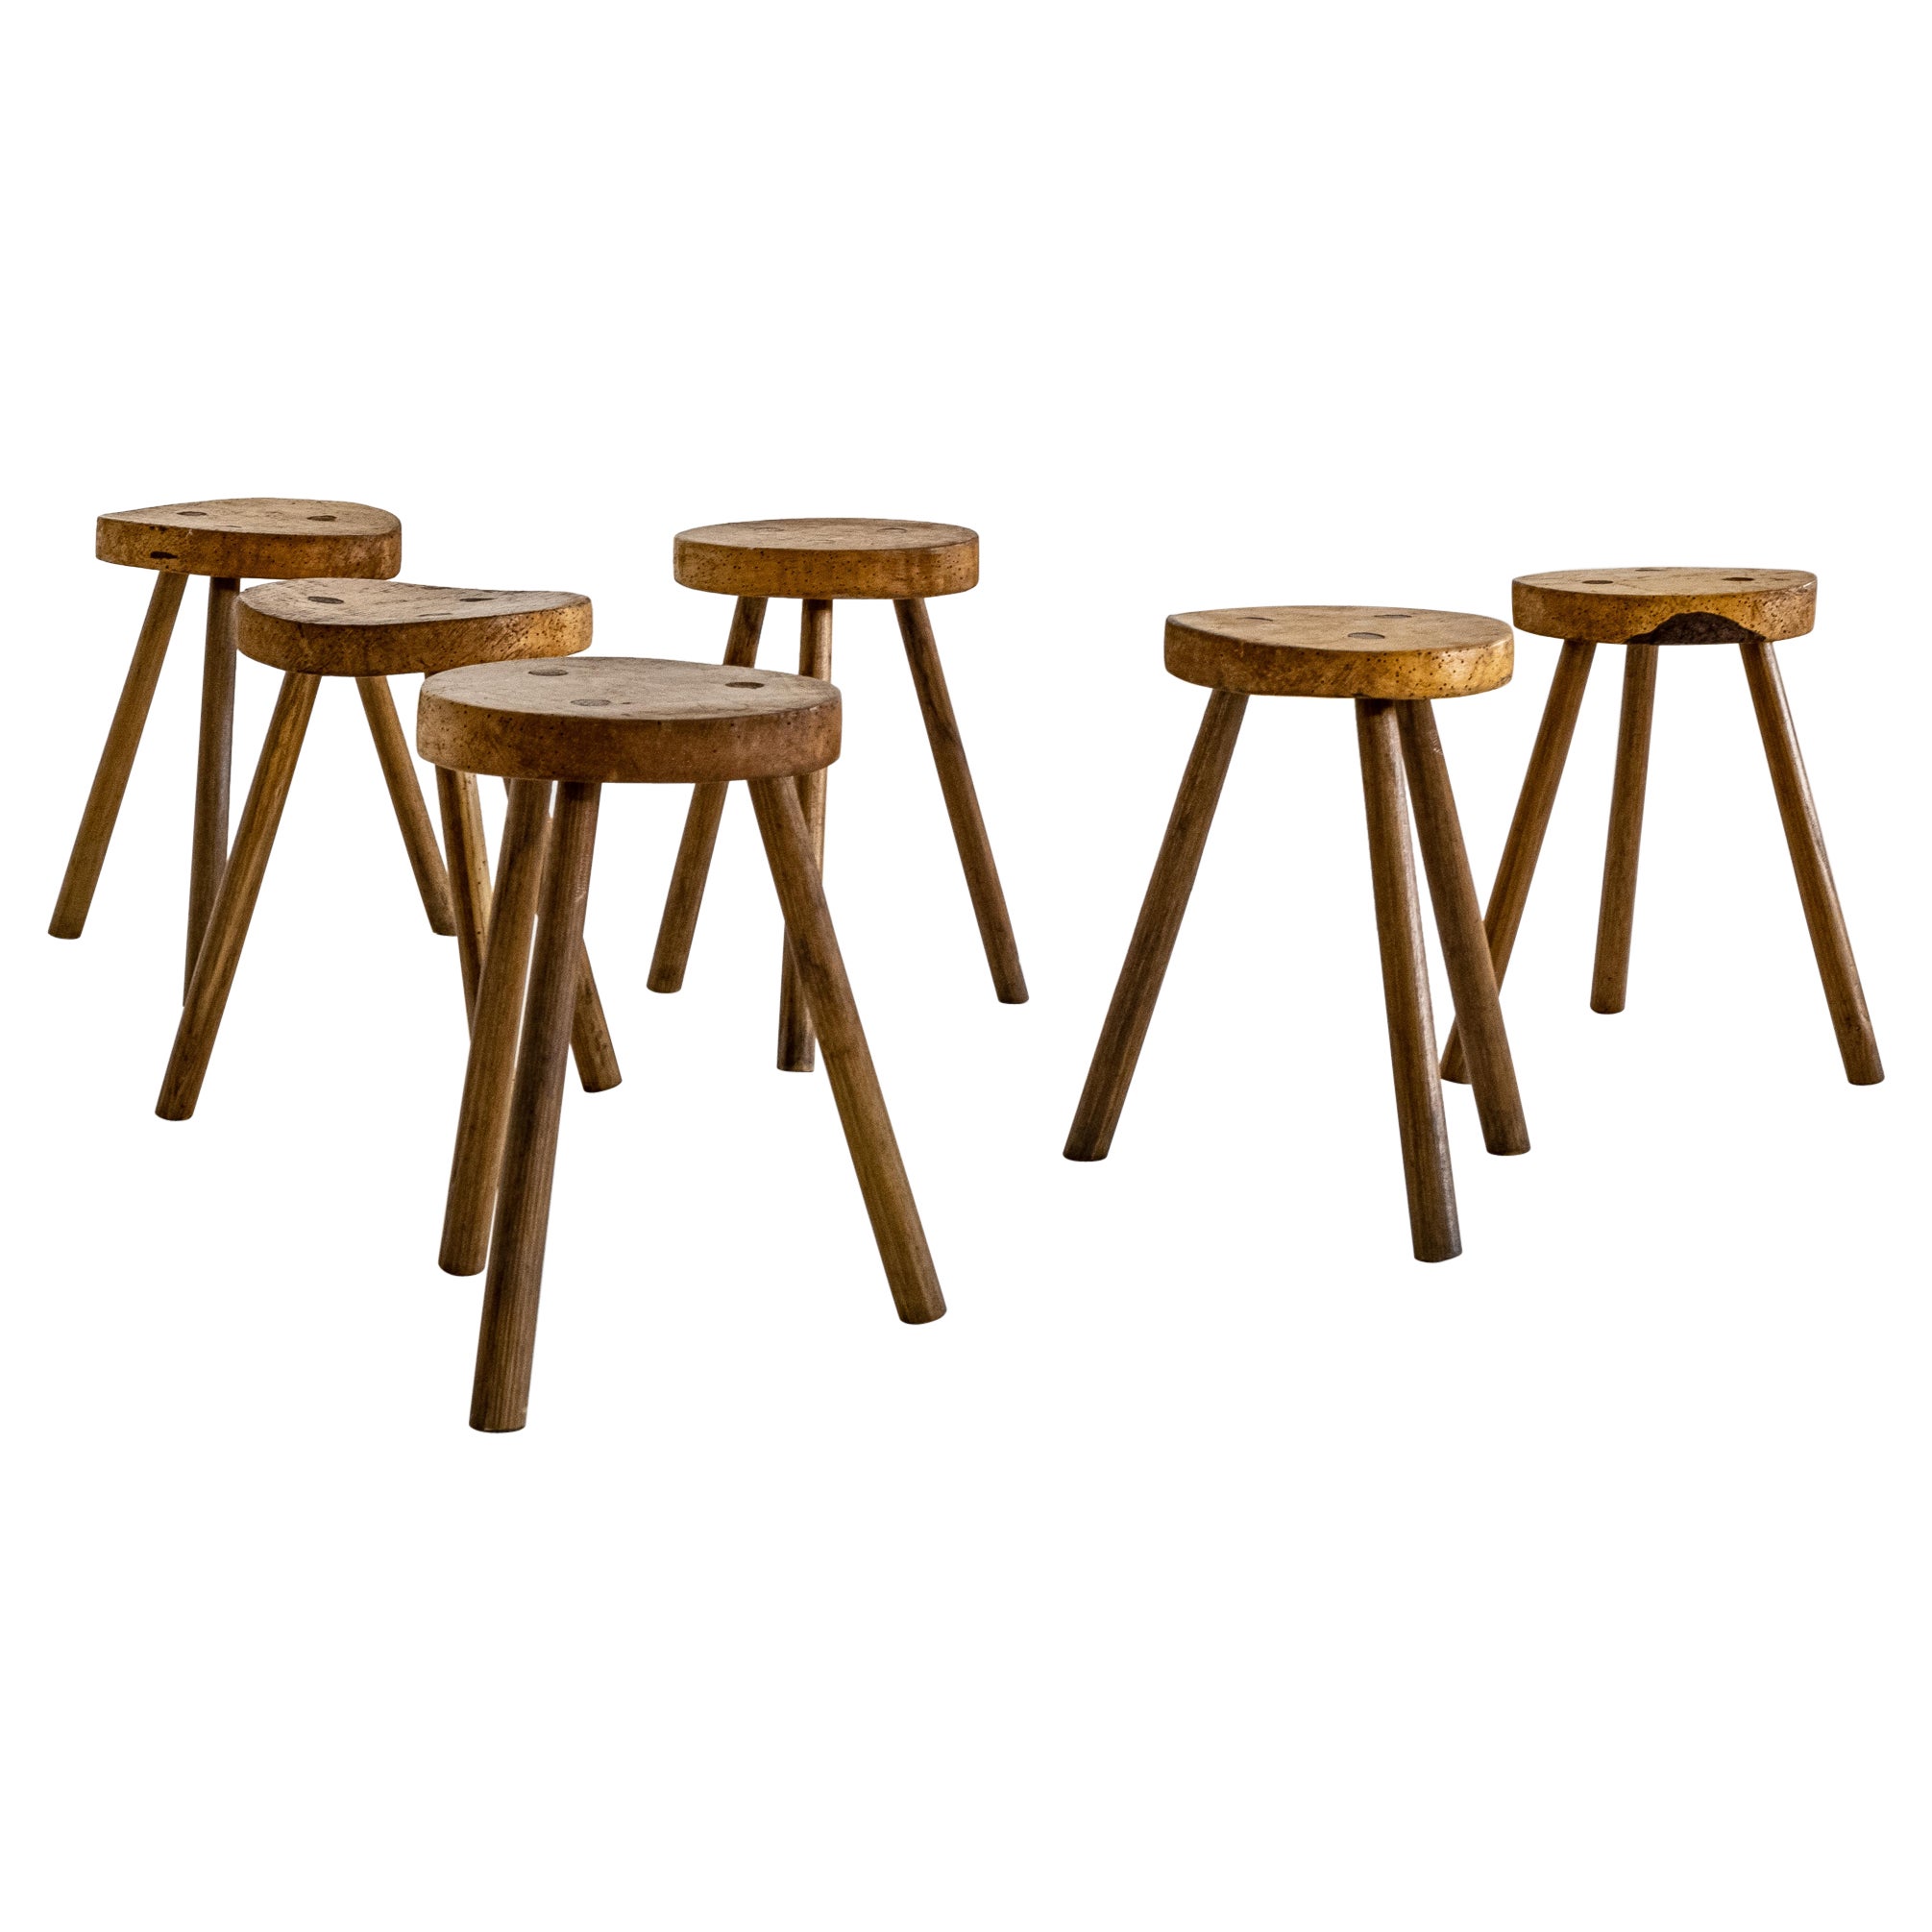 Set of 6, Wooden, Brutalist Tripod Stools or Side Tables, Italy, ca. 1960s